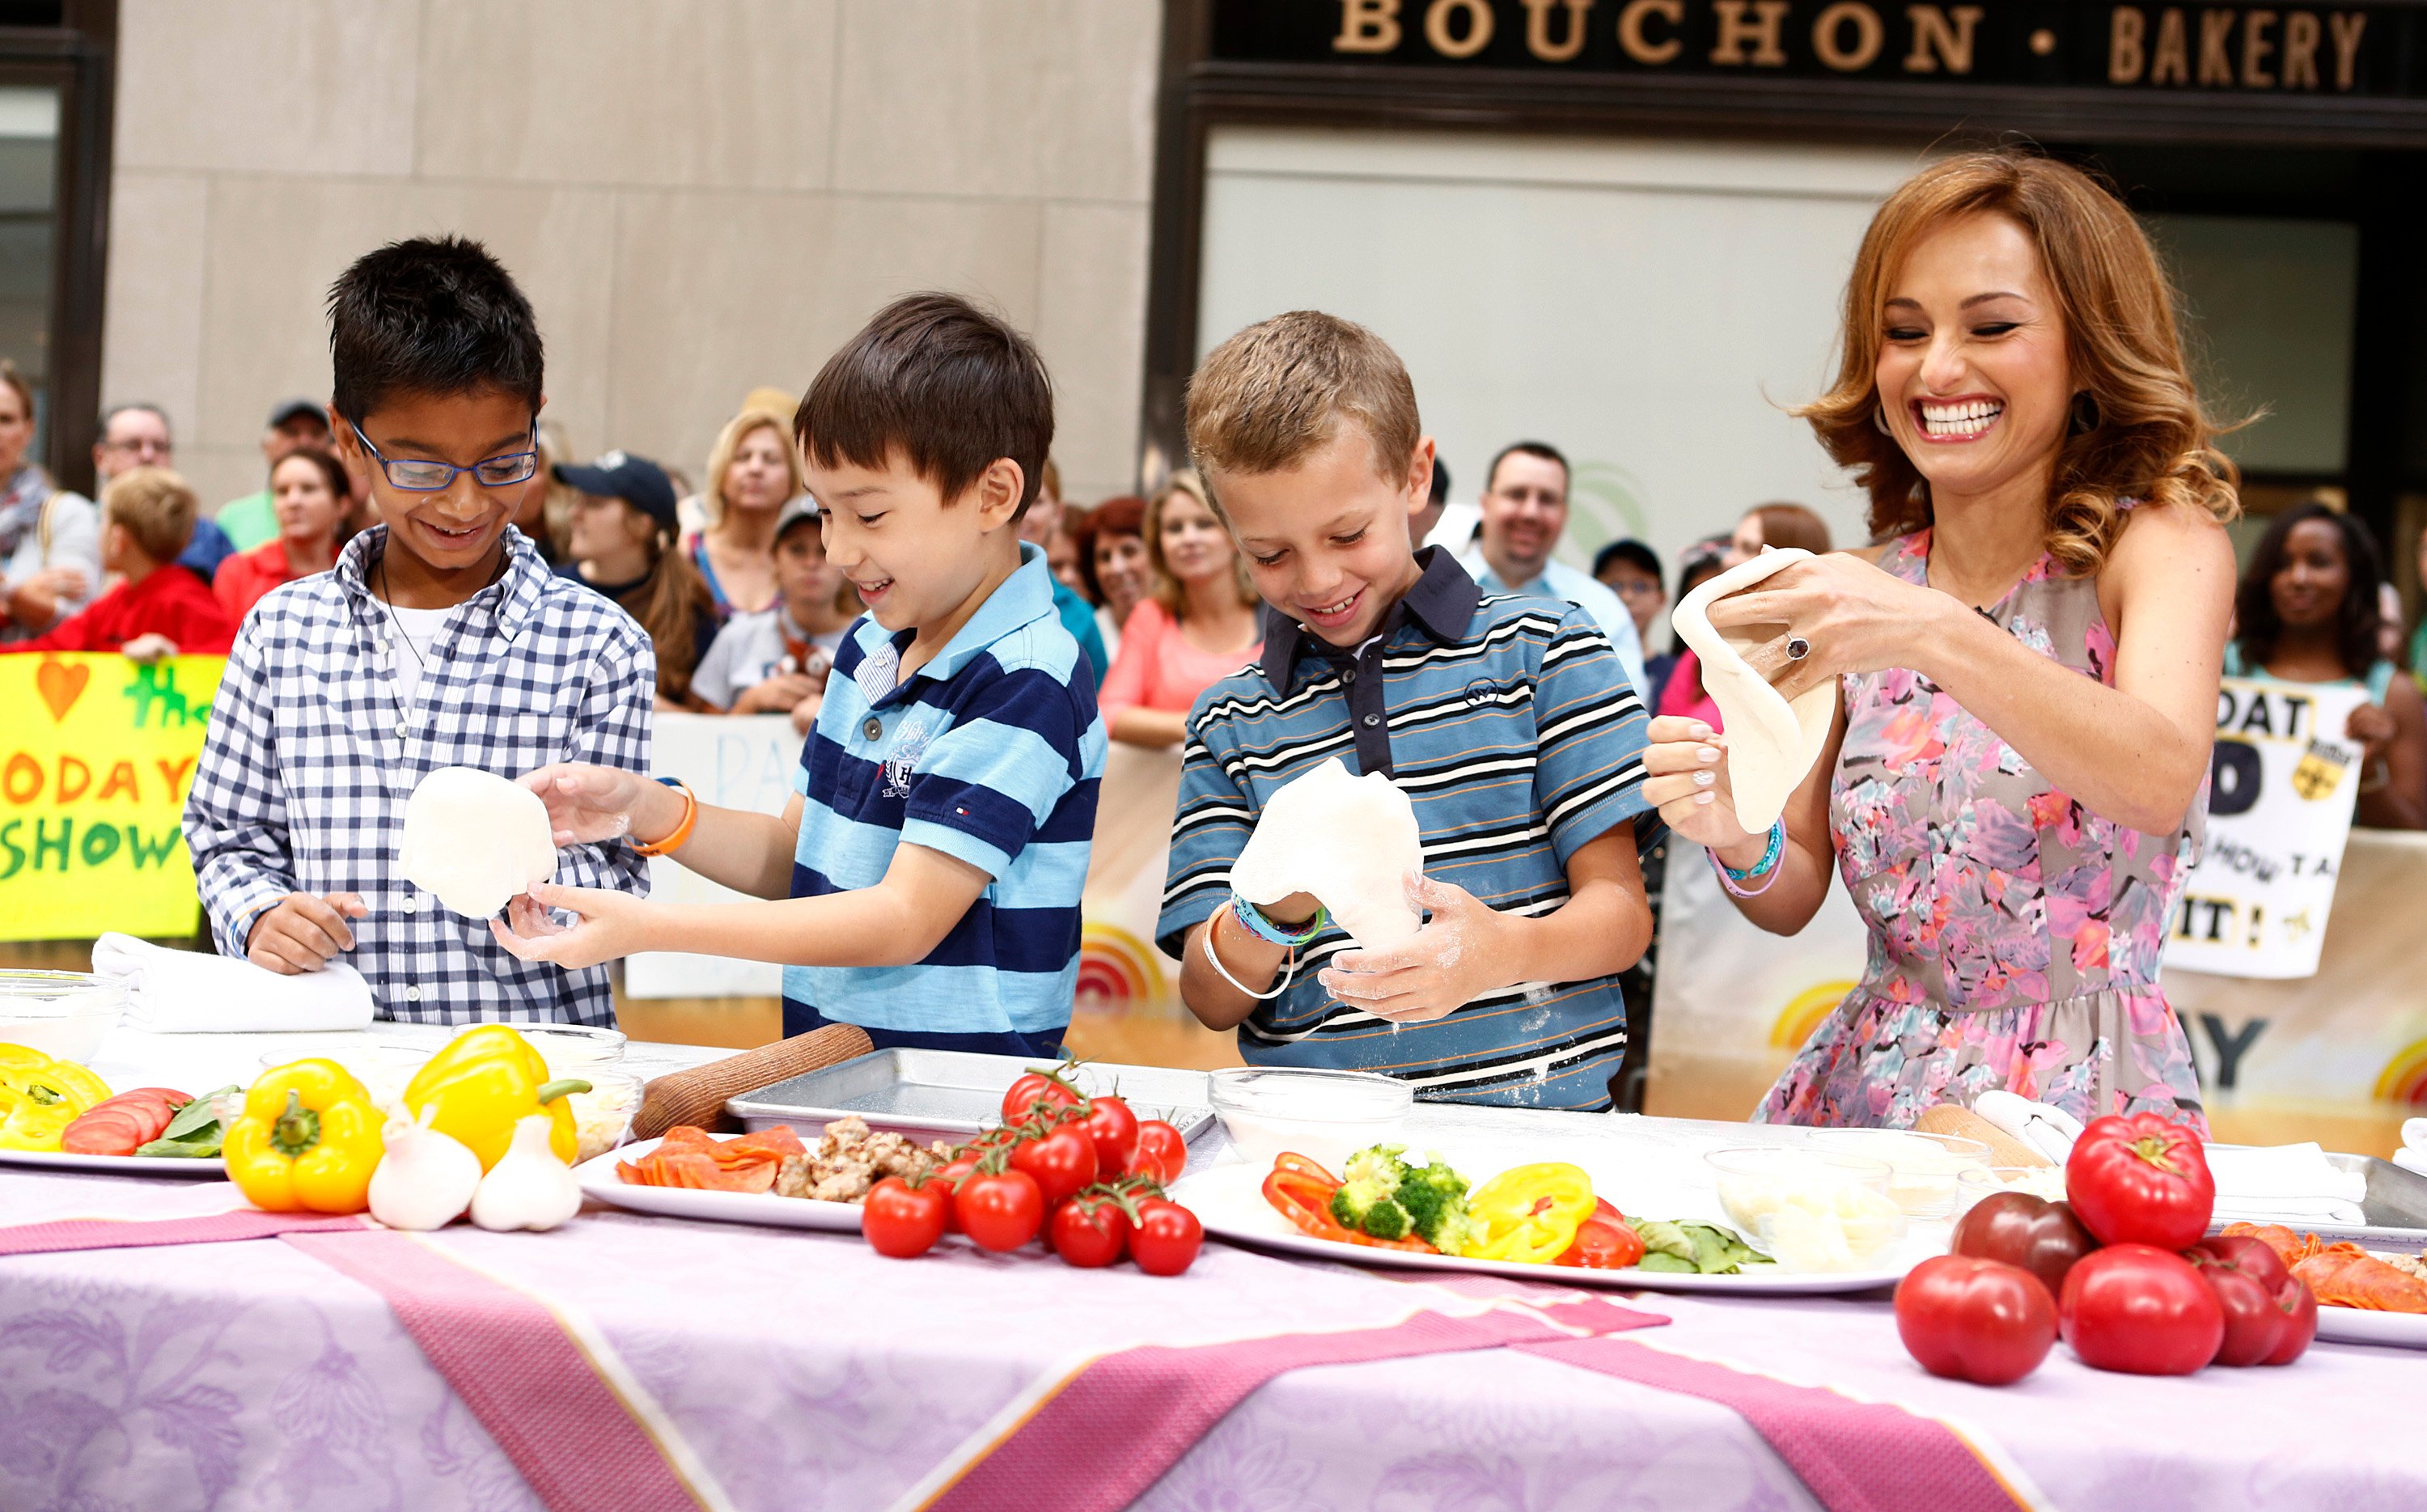 Chef Giada De Laurentiis makes pizza dough with three youngsters in a 2013 appearance on the 'Today Show' plaza.